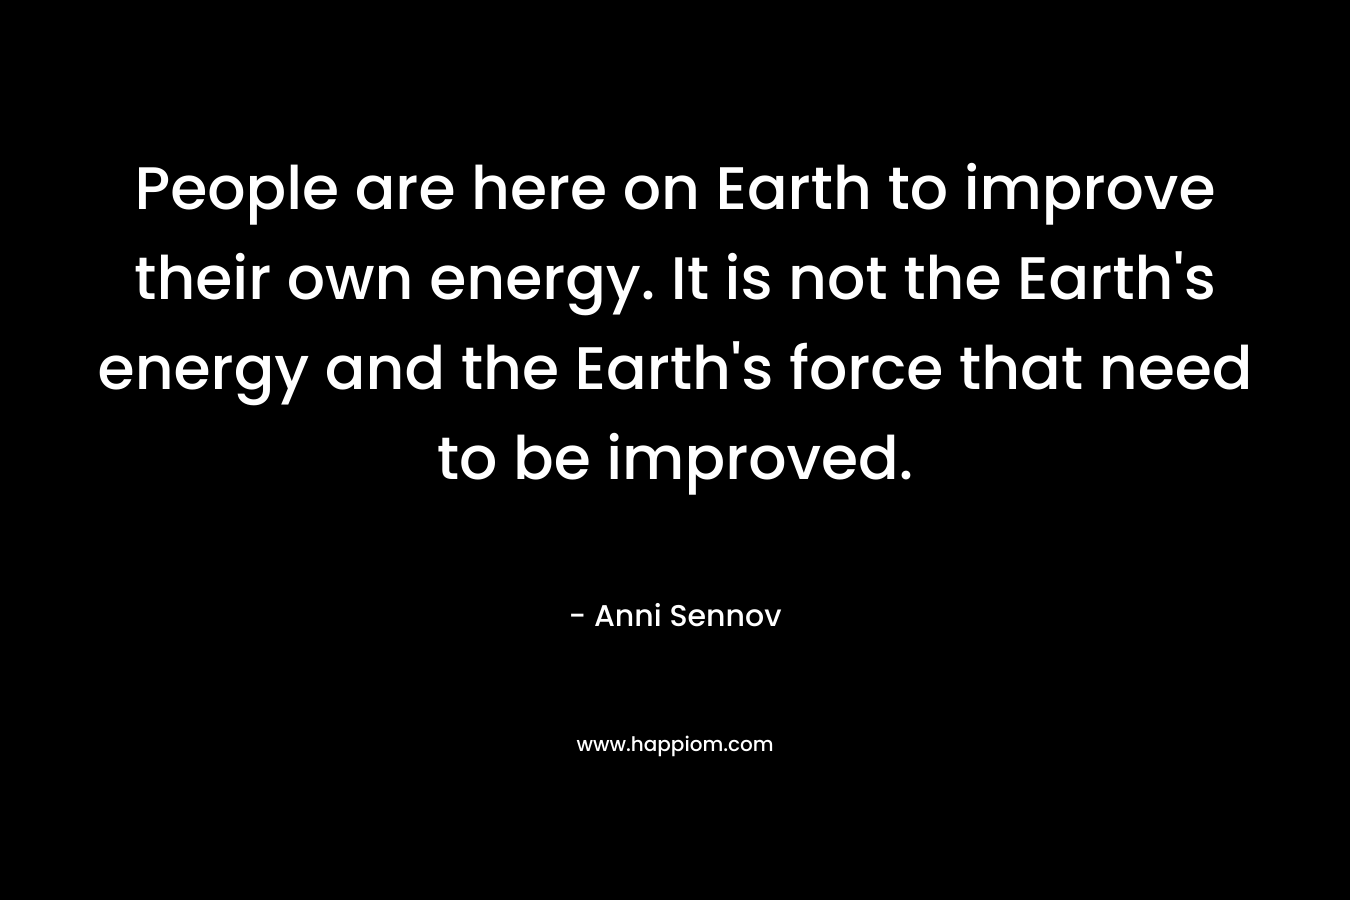 People are here on Earth to improve their own energy. It is not the Earth's energy and the Earth's force that need to be improved.